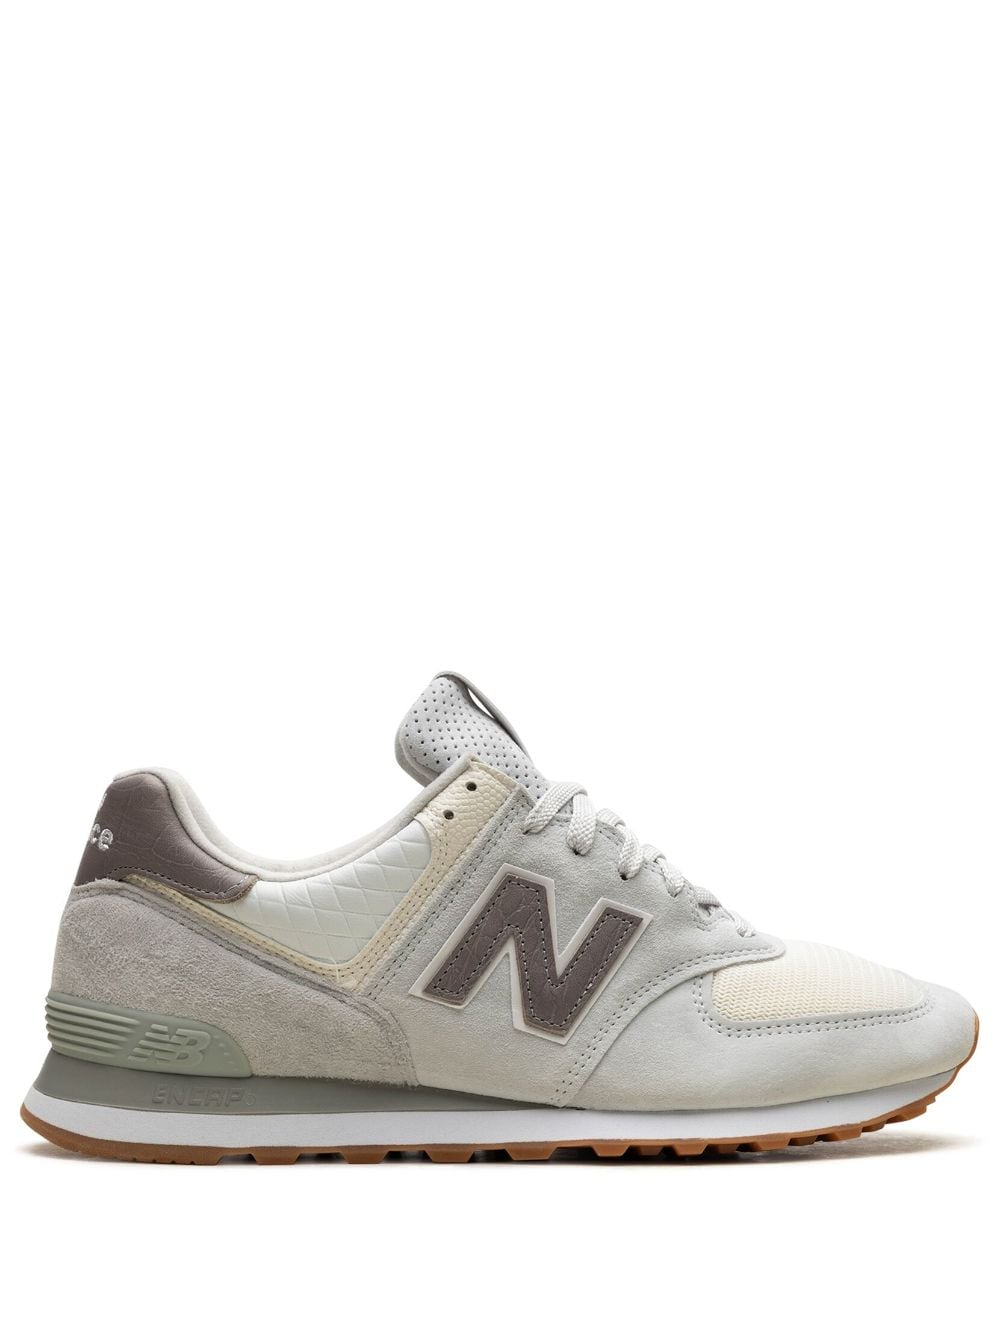 New Balance 574 Made In The USA "Pride" sneakers - Grey von New Balance